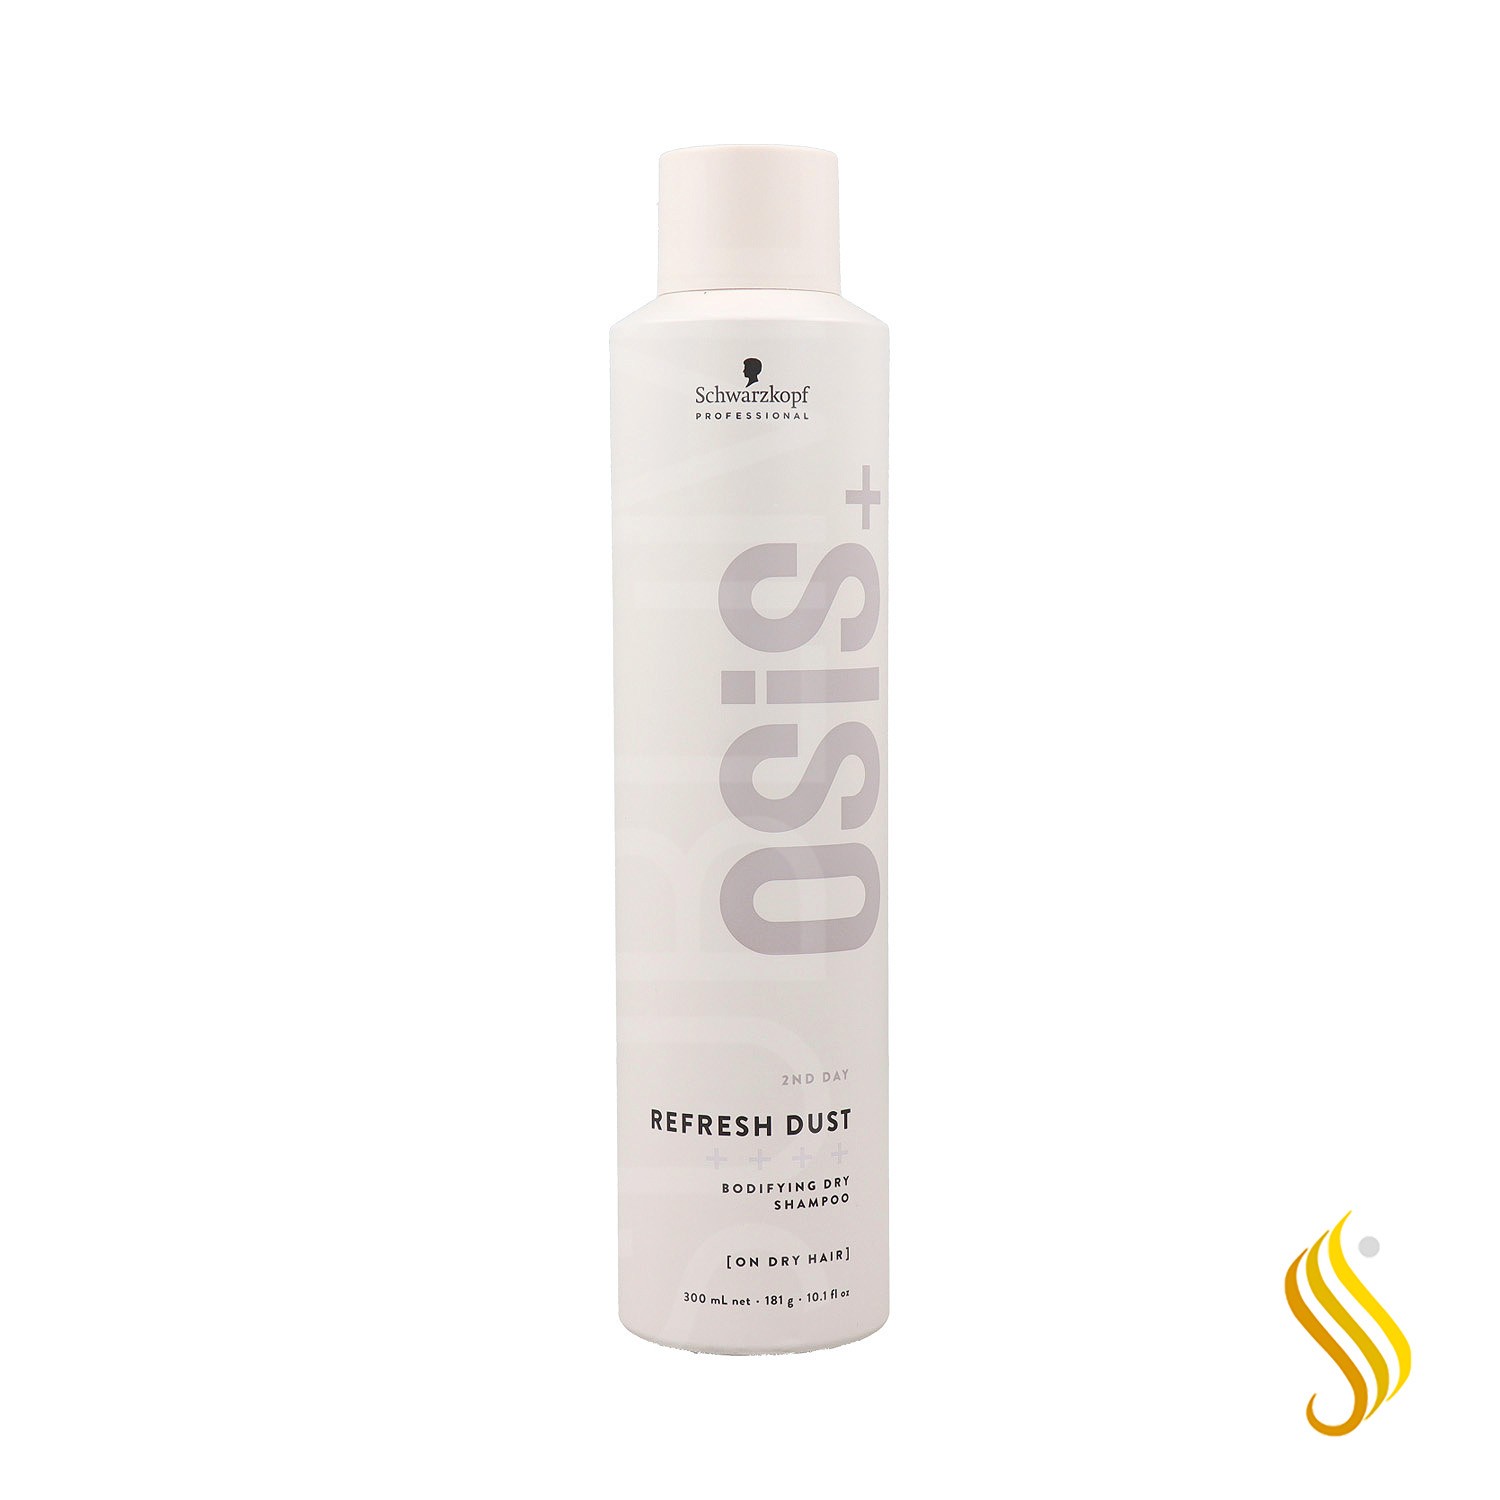 Schwarzkopf Osis Hair From The Next Day Refresh Dust Dry Shampoo 300 ml